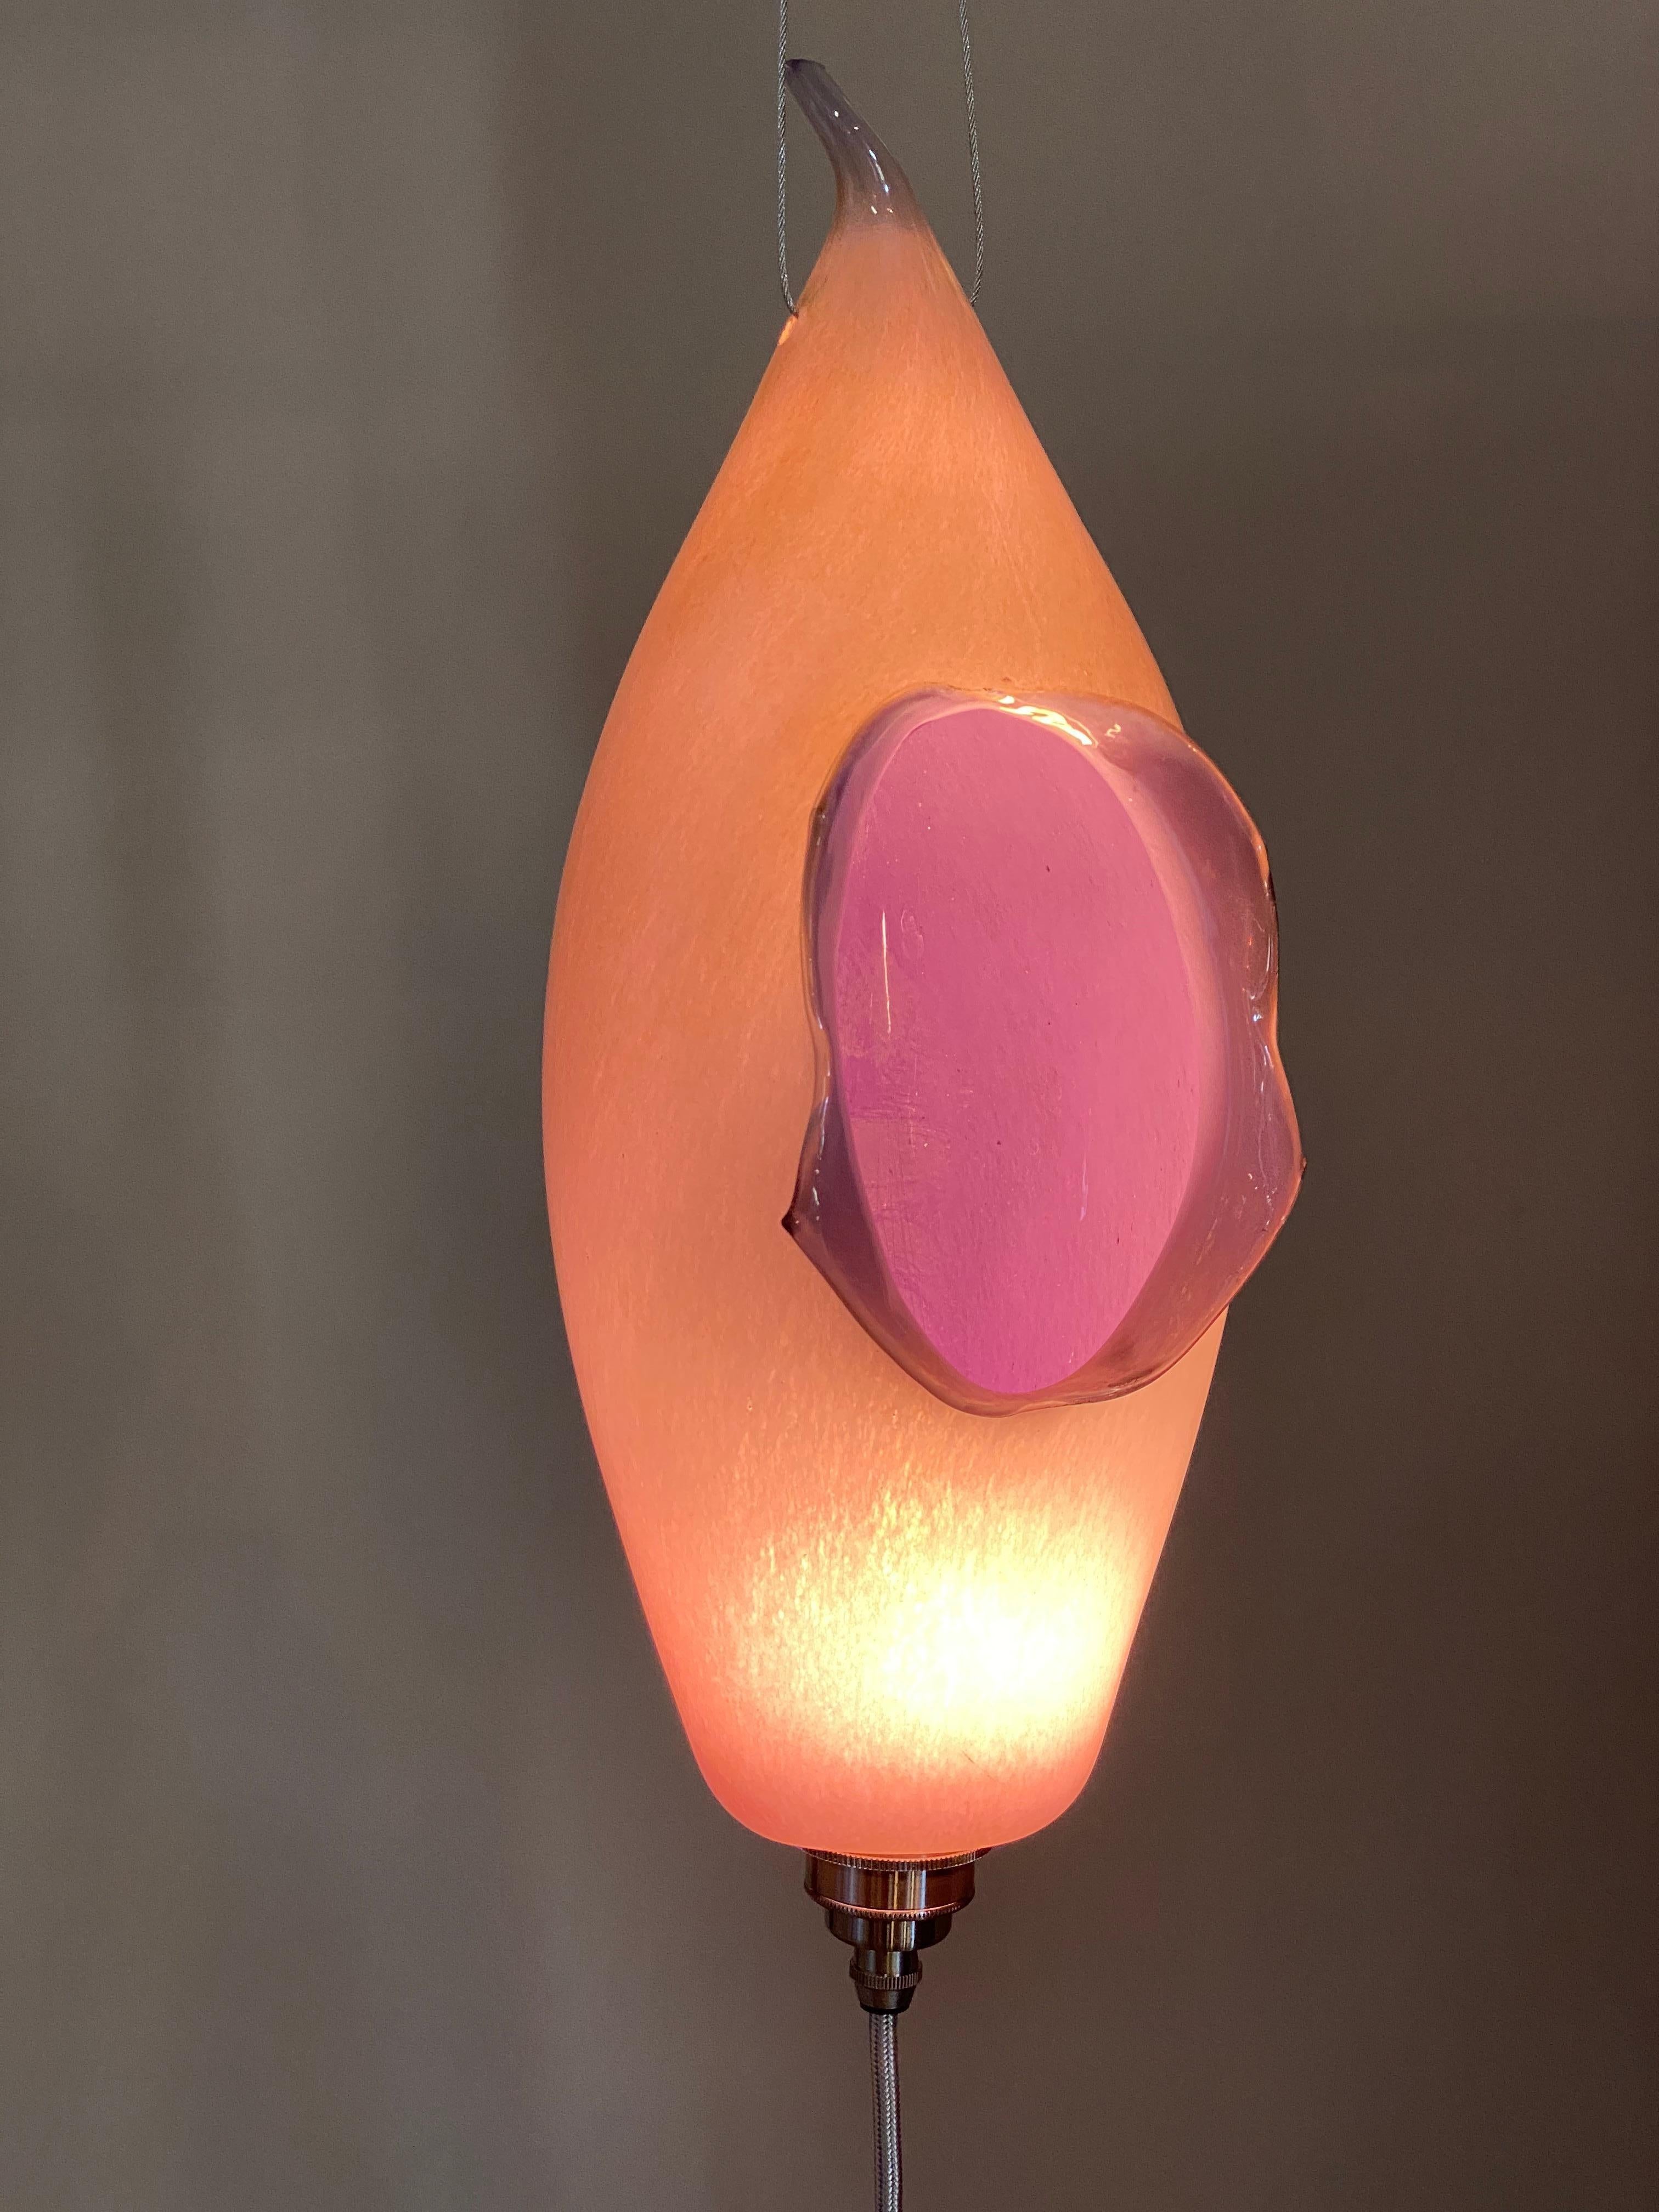 American Blown Glass Pink and Orange Lamp Pendent Light, 21st Century by Mattia Biagi For Sale